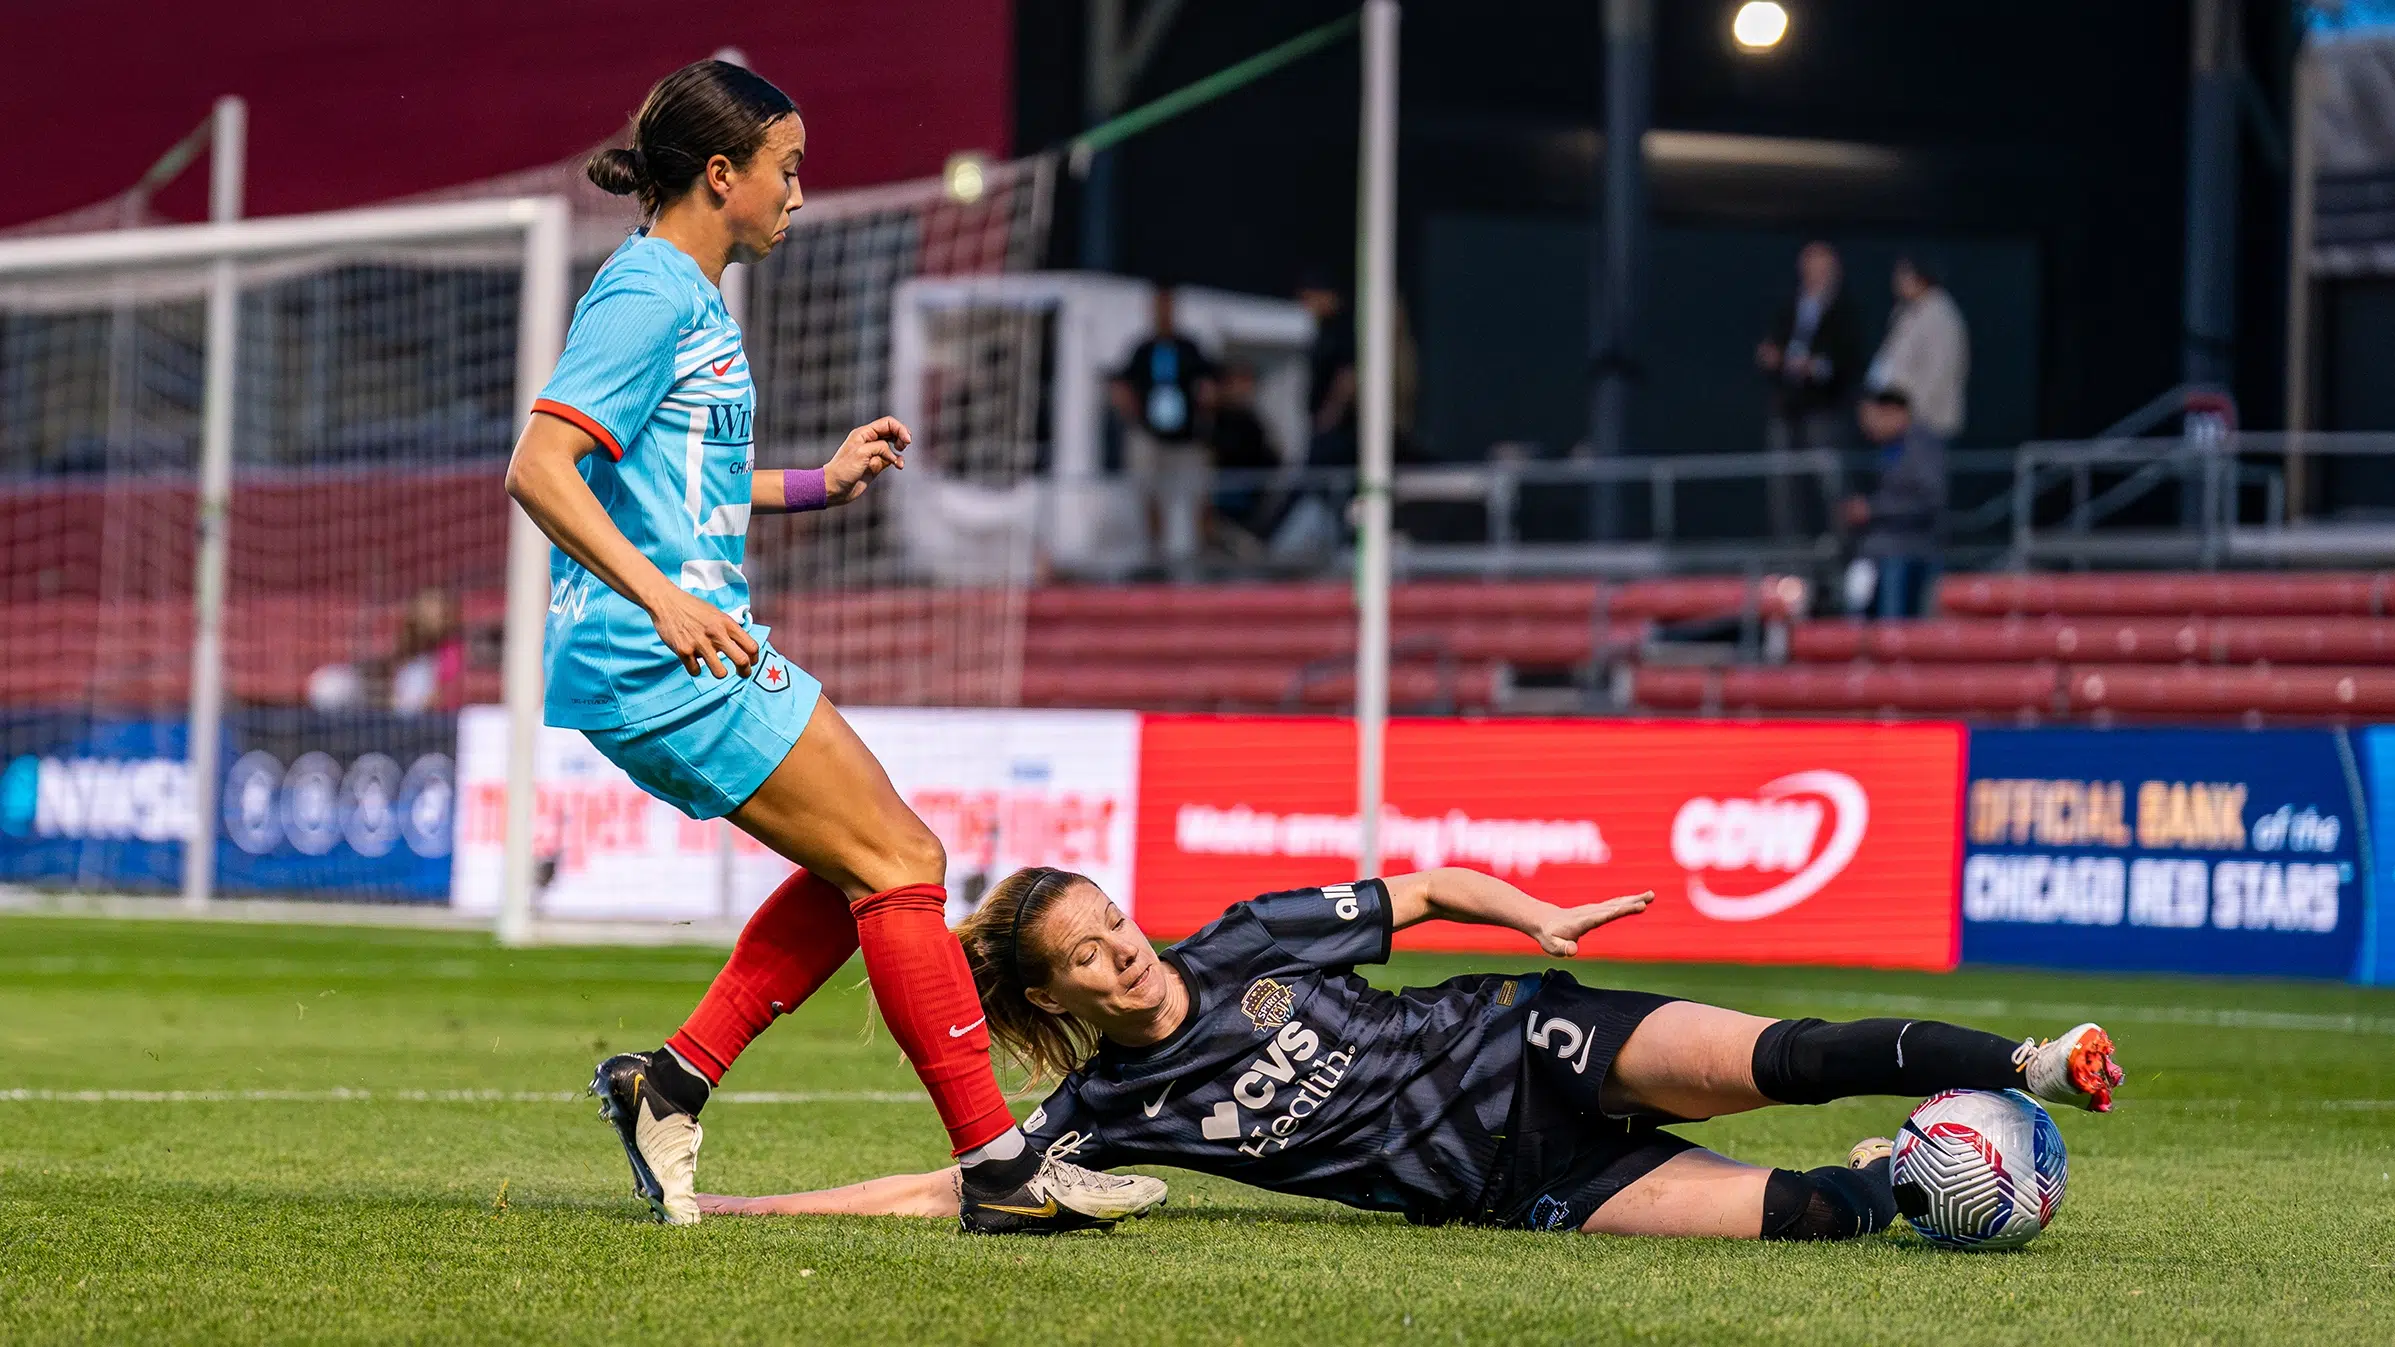 Annaig Butel in a black Spirit kit slide tackles the ball away from Mallory Swanson in a bright blue kit.